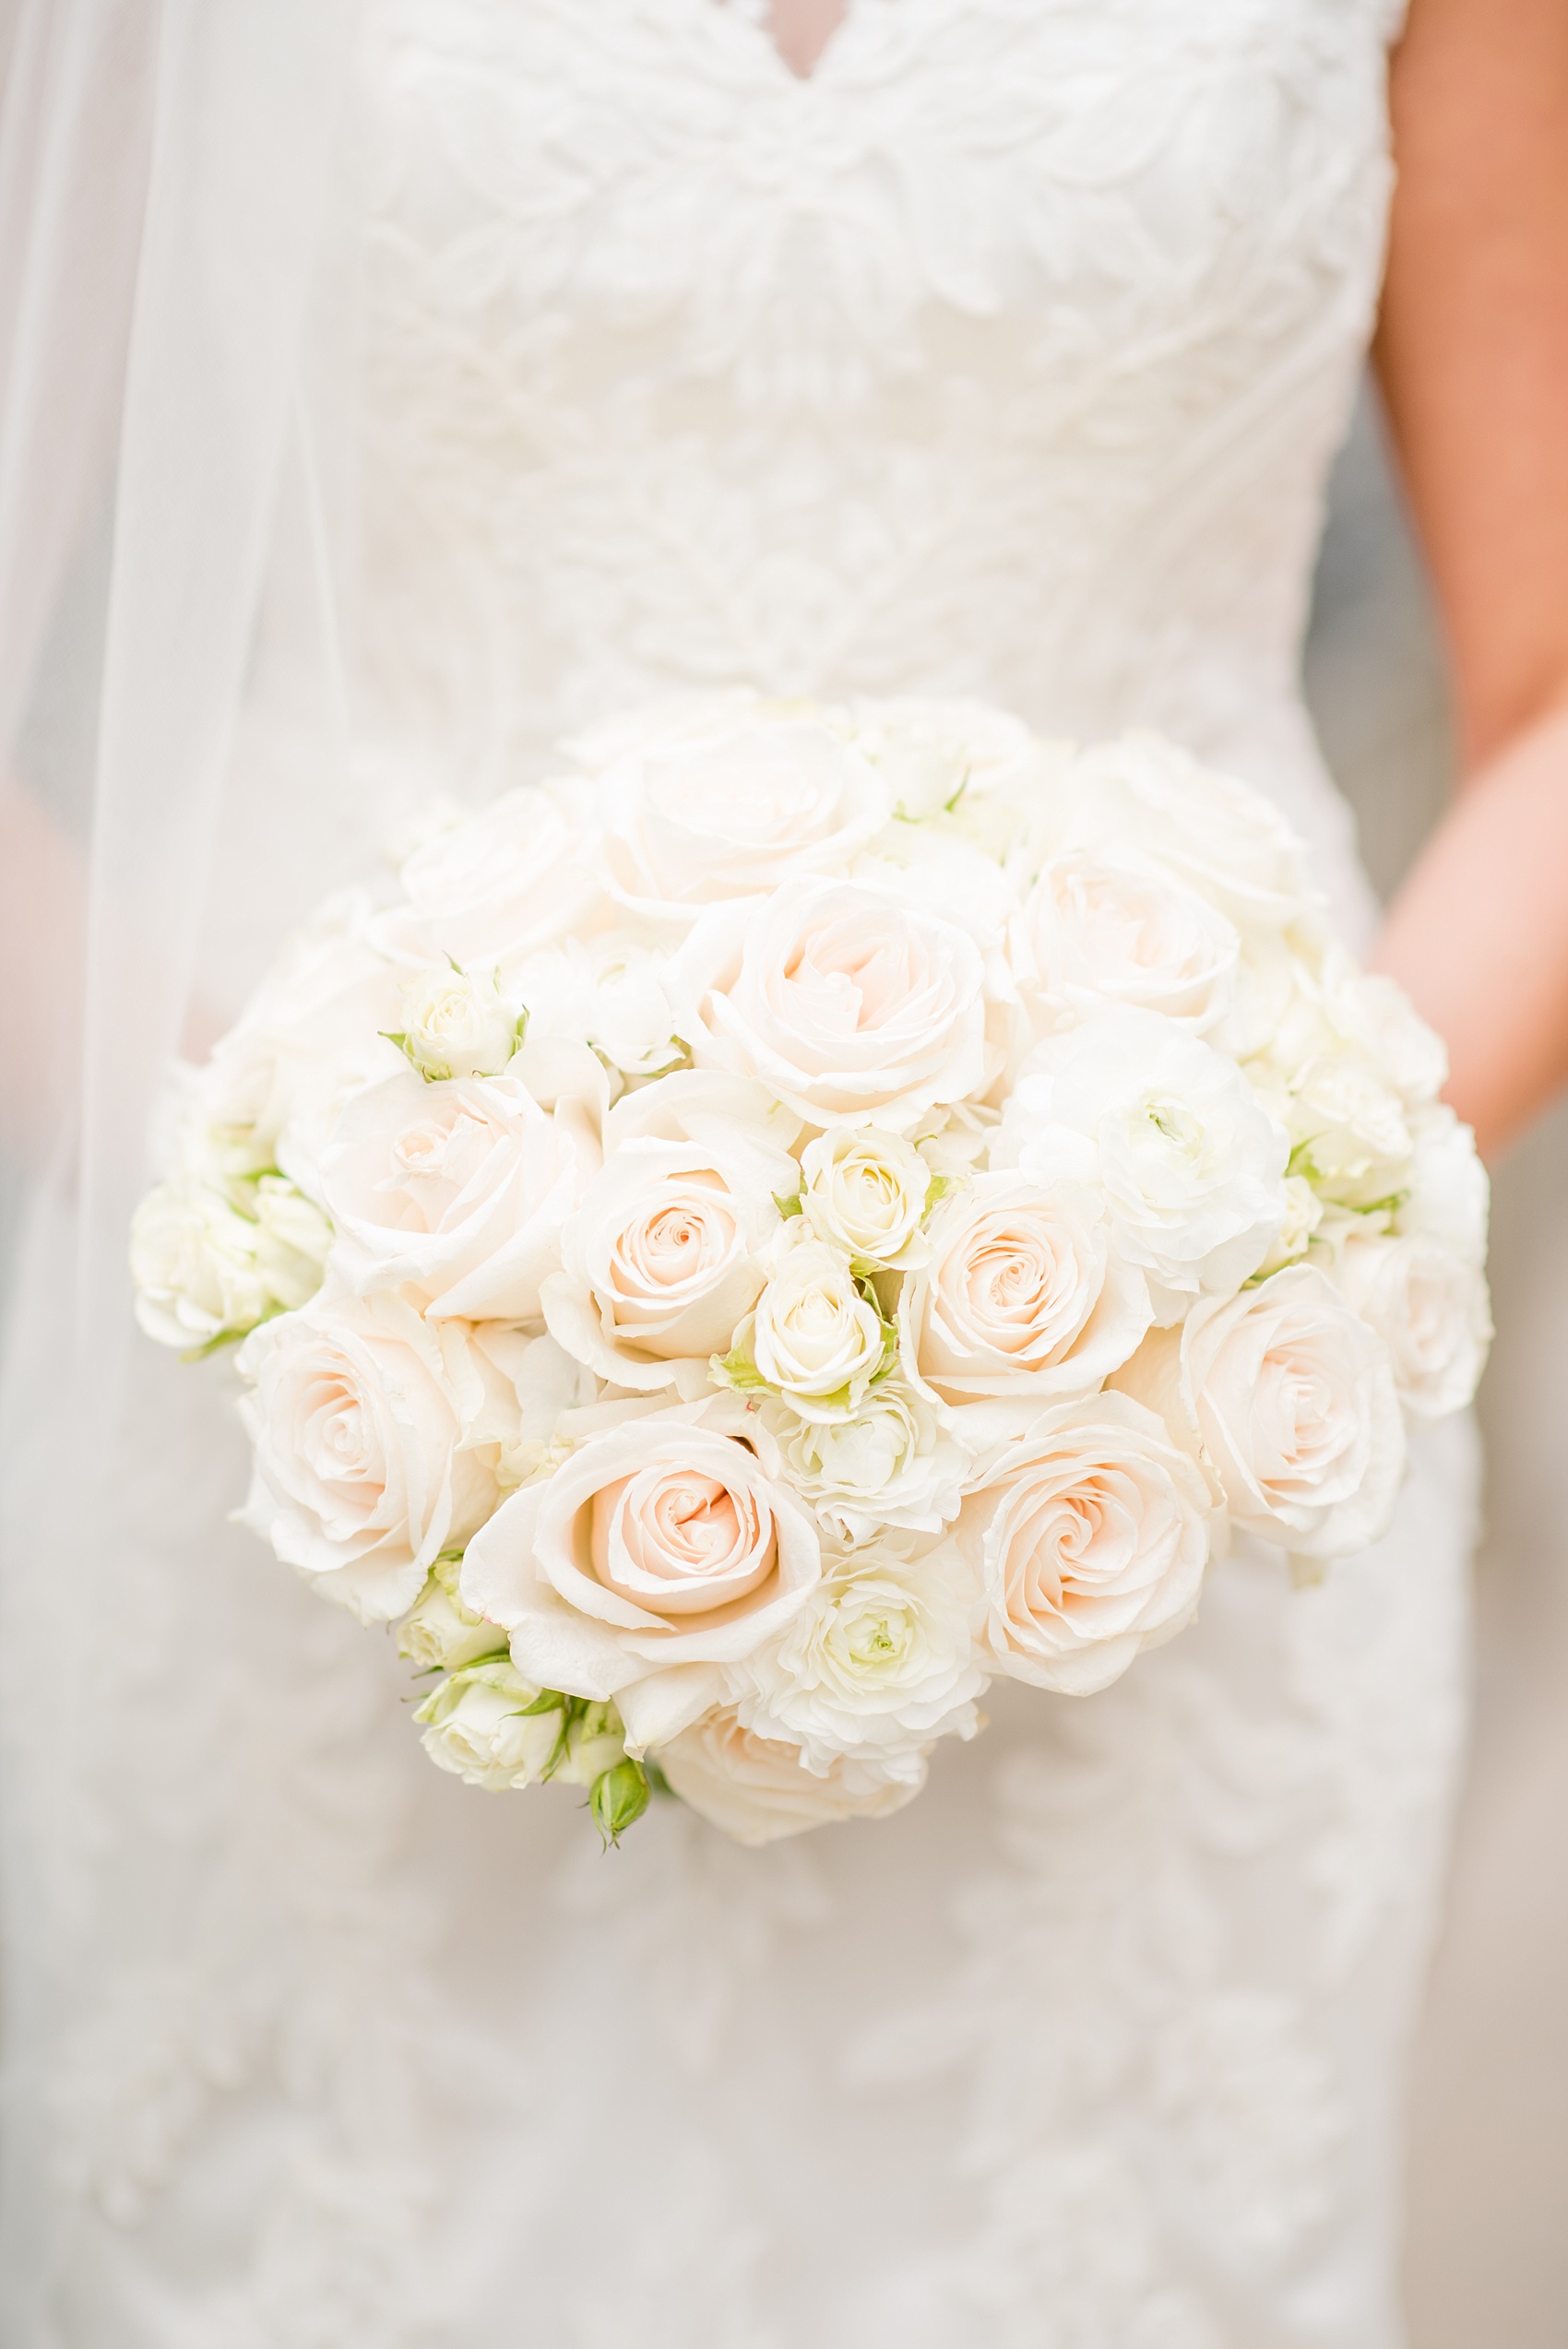 Mikkel Paige Photography photos of a wedding in downtown Chicago at The Rookery. The bride carried a white and light peach bouquet of roses.